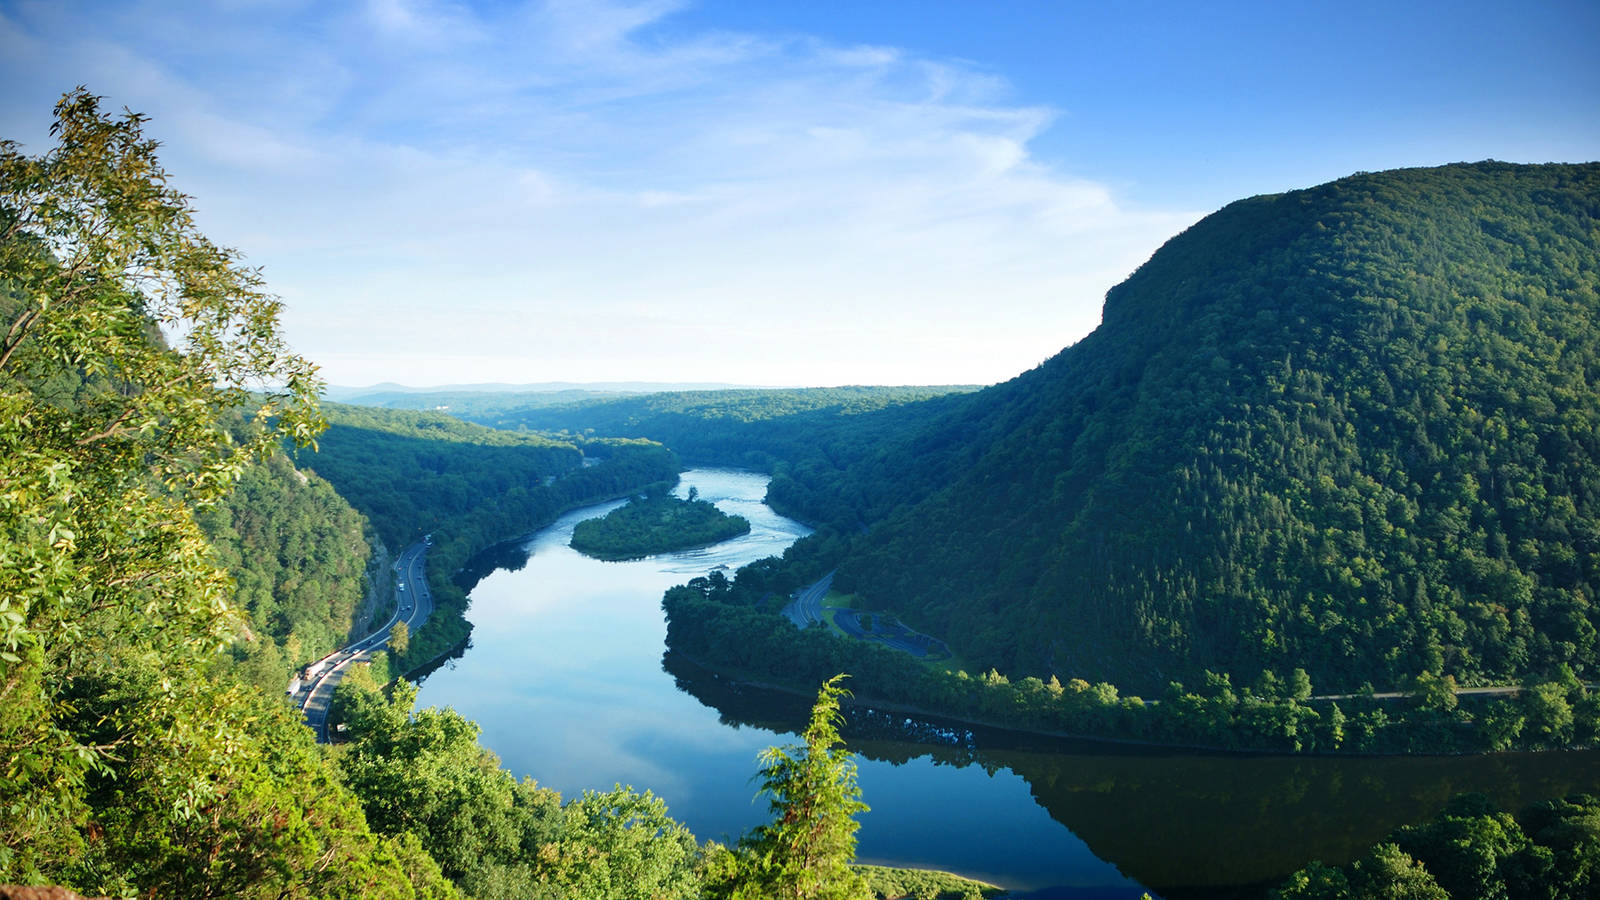 Report Confirms Delaware Water Gap National Recreation Area Is Economic Powerhouse for NJ, PA Communities